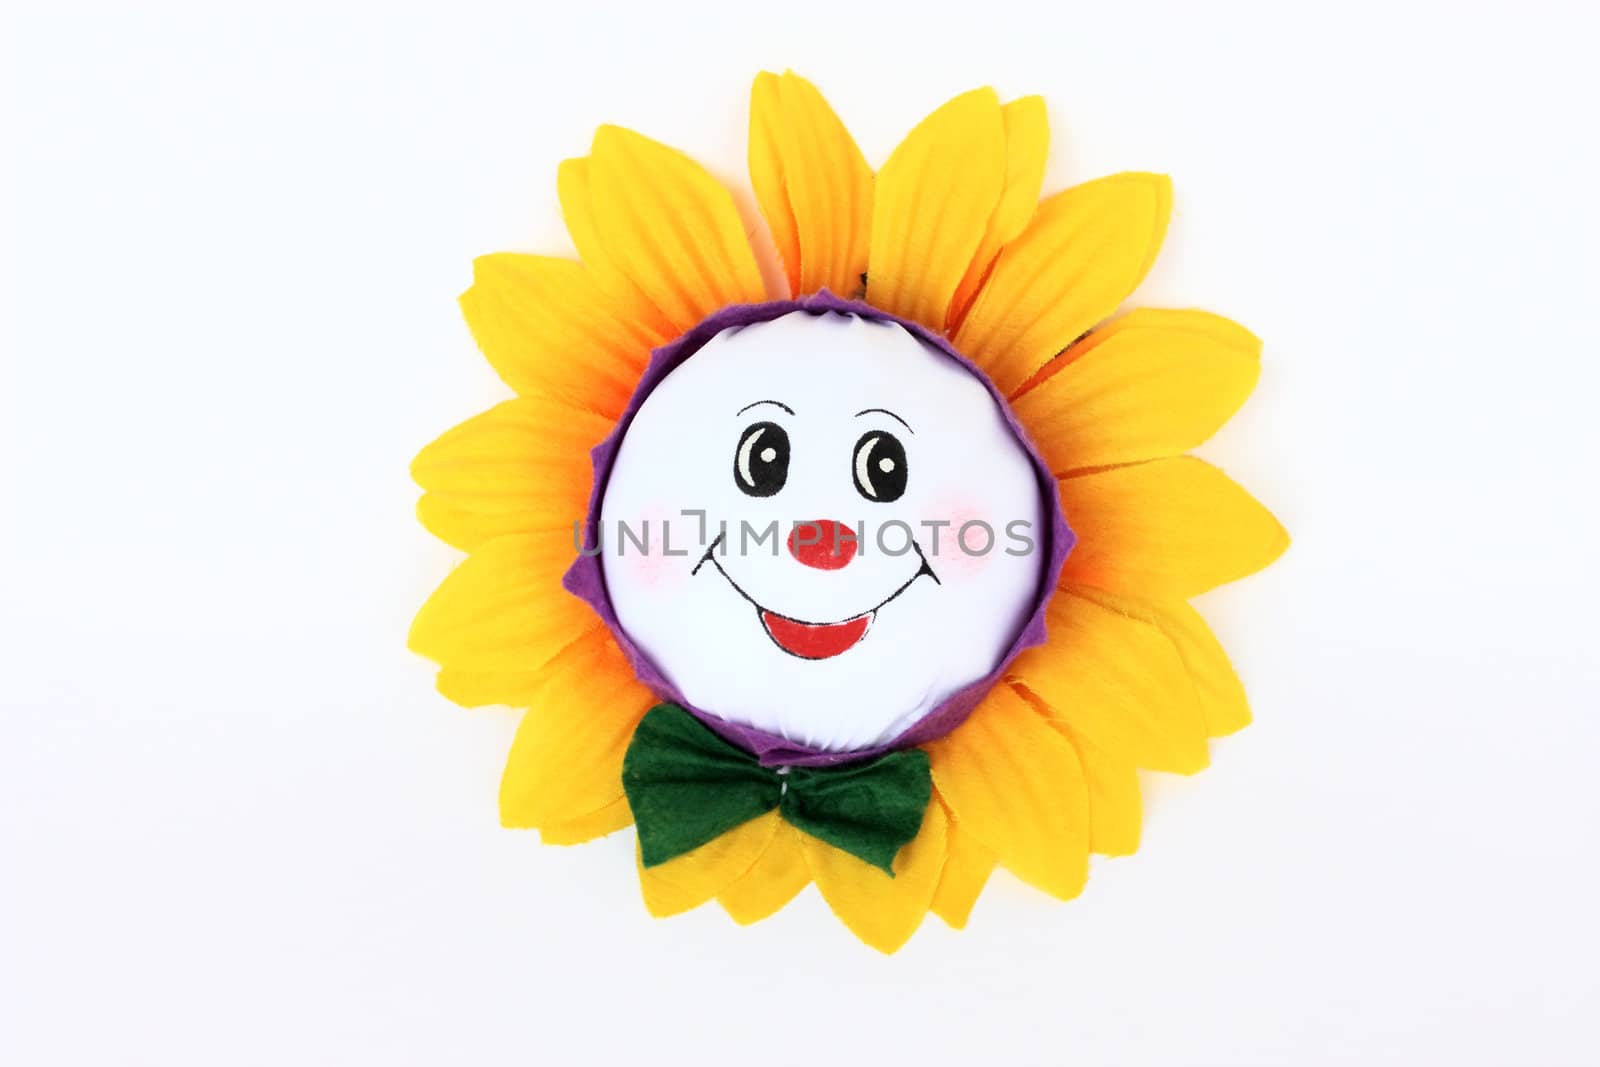 decoration on the wall, colorful yellow sunflower